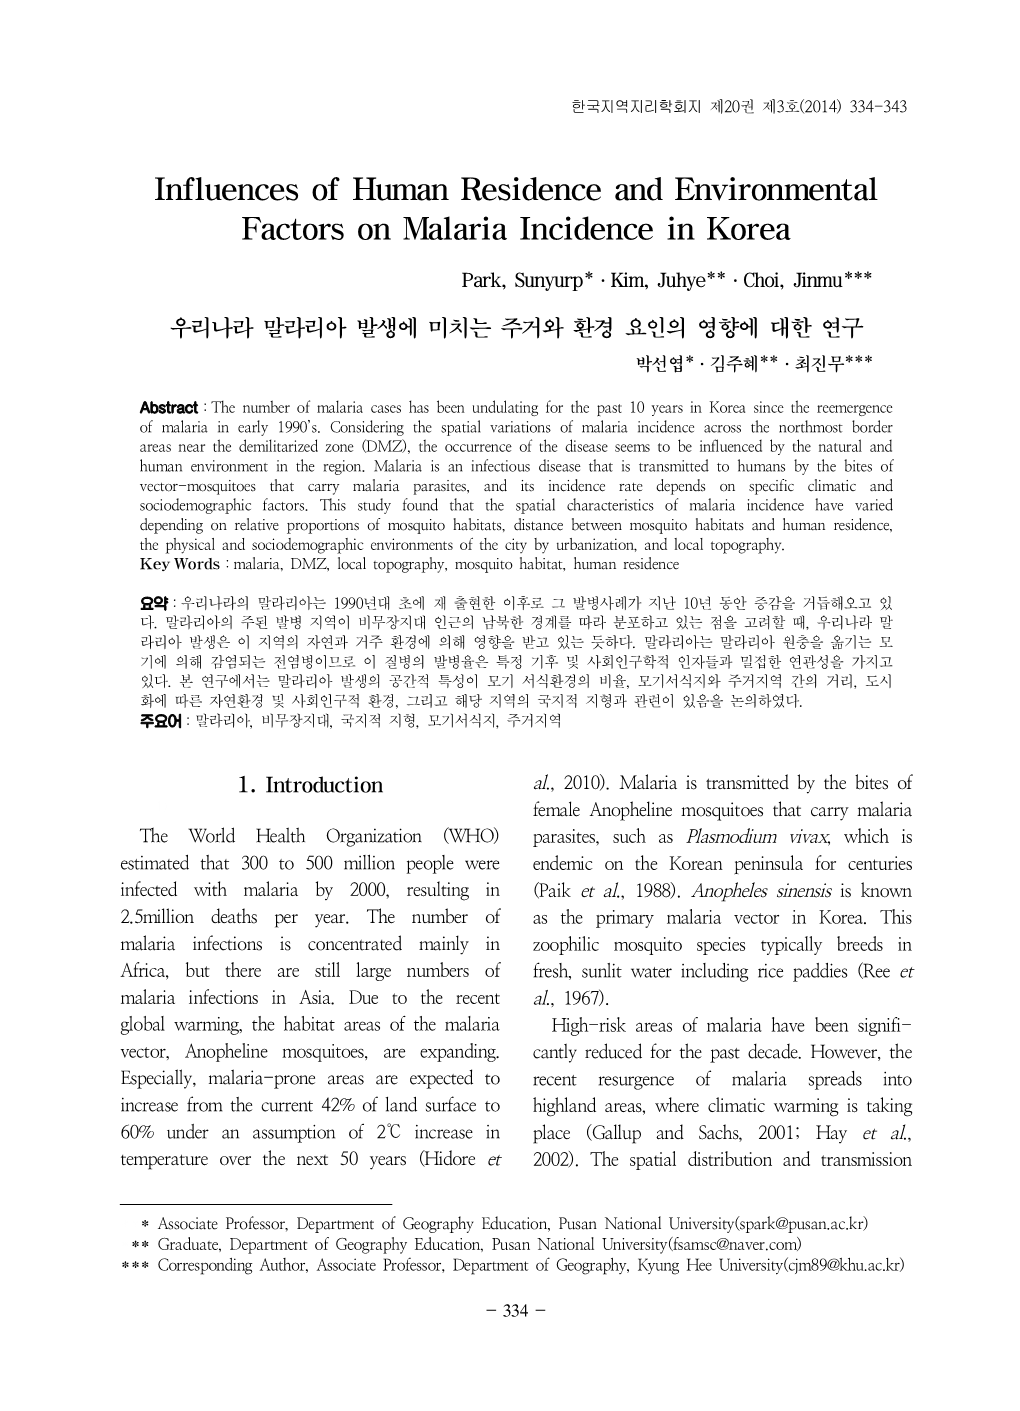 Influences of Human Residence and Environmental Factors on Malaria Incidence in Korea